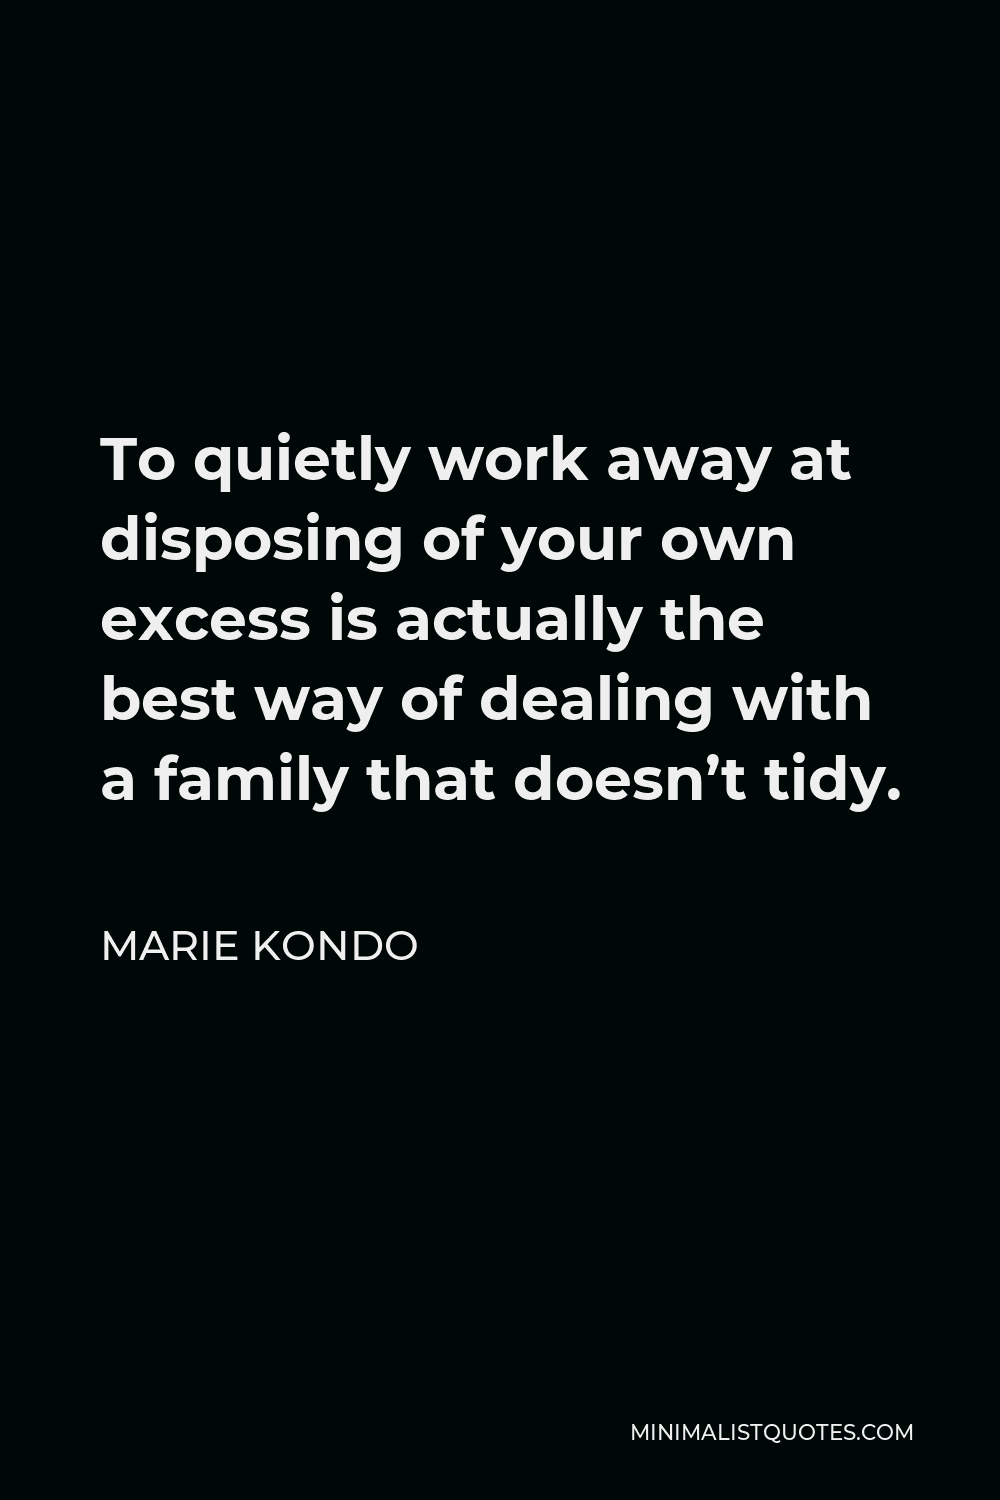 Marie Kondo Quote - To quietly work away at disposing of your own excess is actually the best way of dealing with a family that doesn’t tidy.